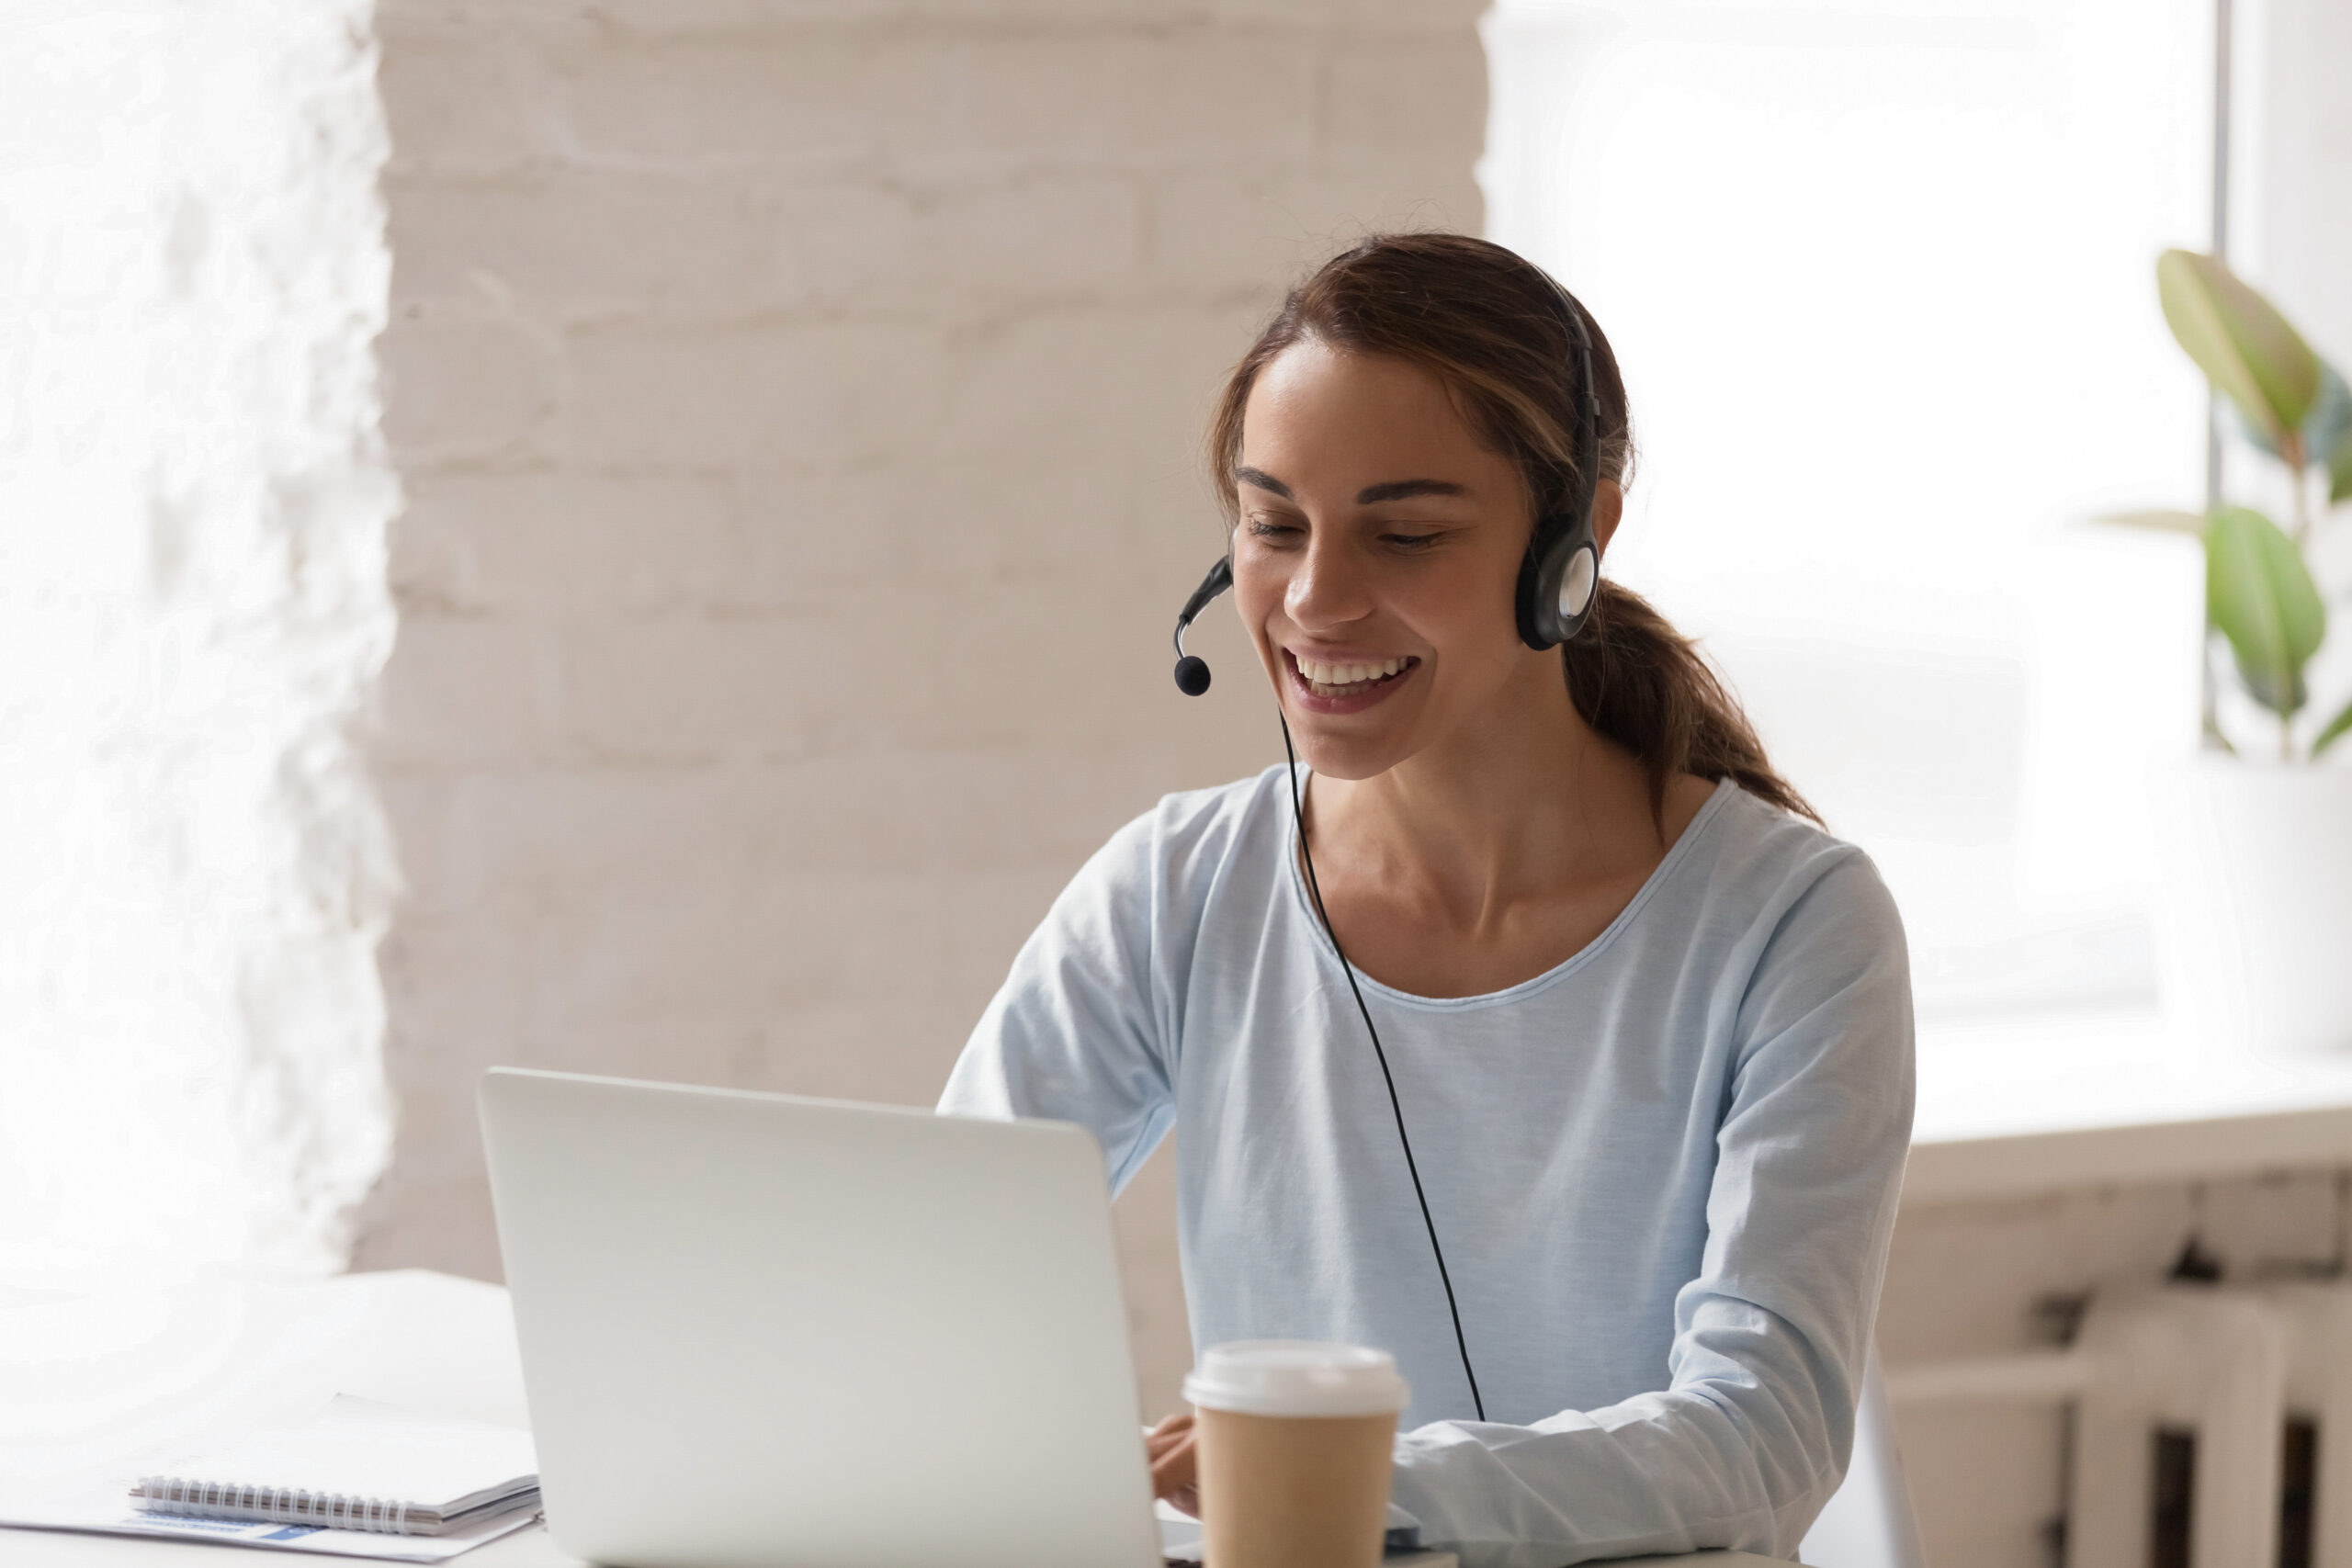 Beautiful smiling woman working in headphones at office. Call center introduction. Happy employee at workplace. People at work at home. Video job interview, language course, class concept